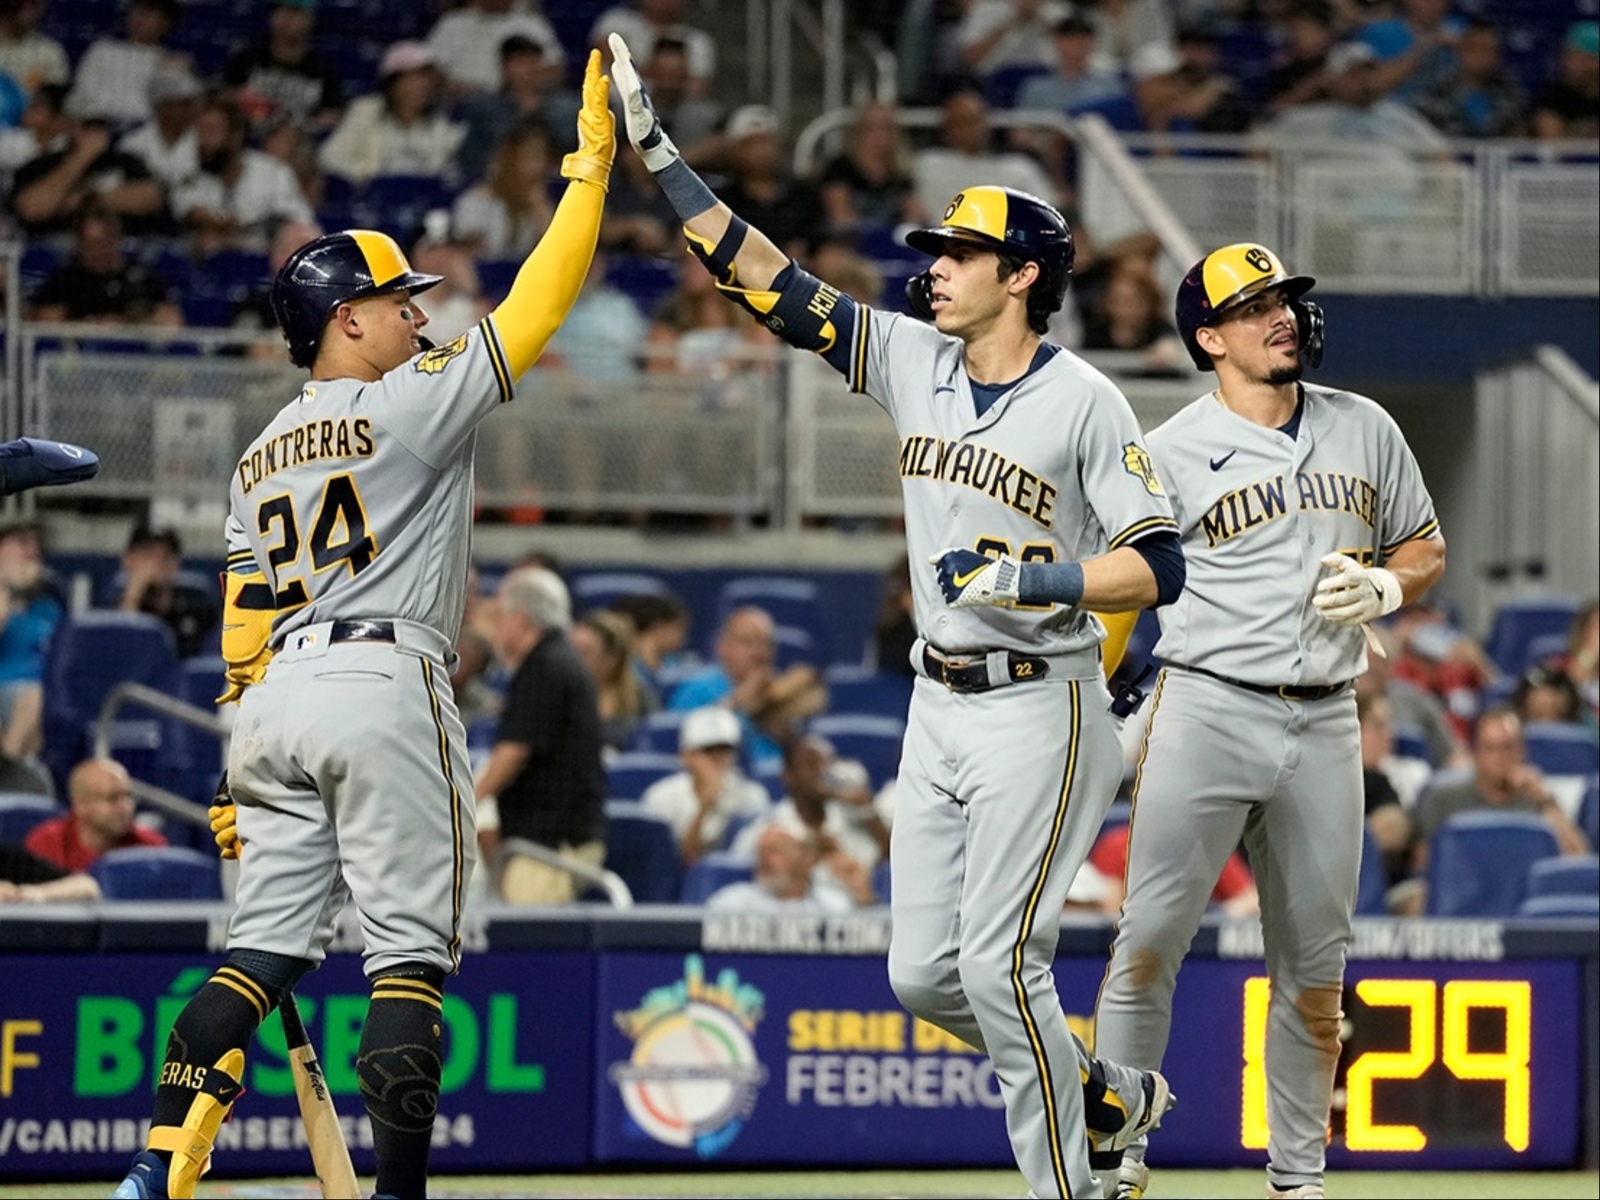 Celebrate the Brewers' postseason with a BOGO beer deal at AmFam